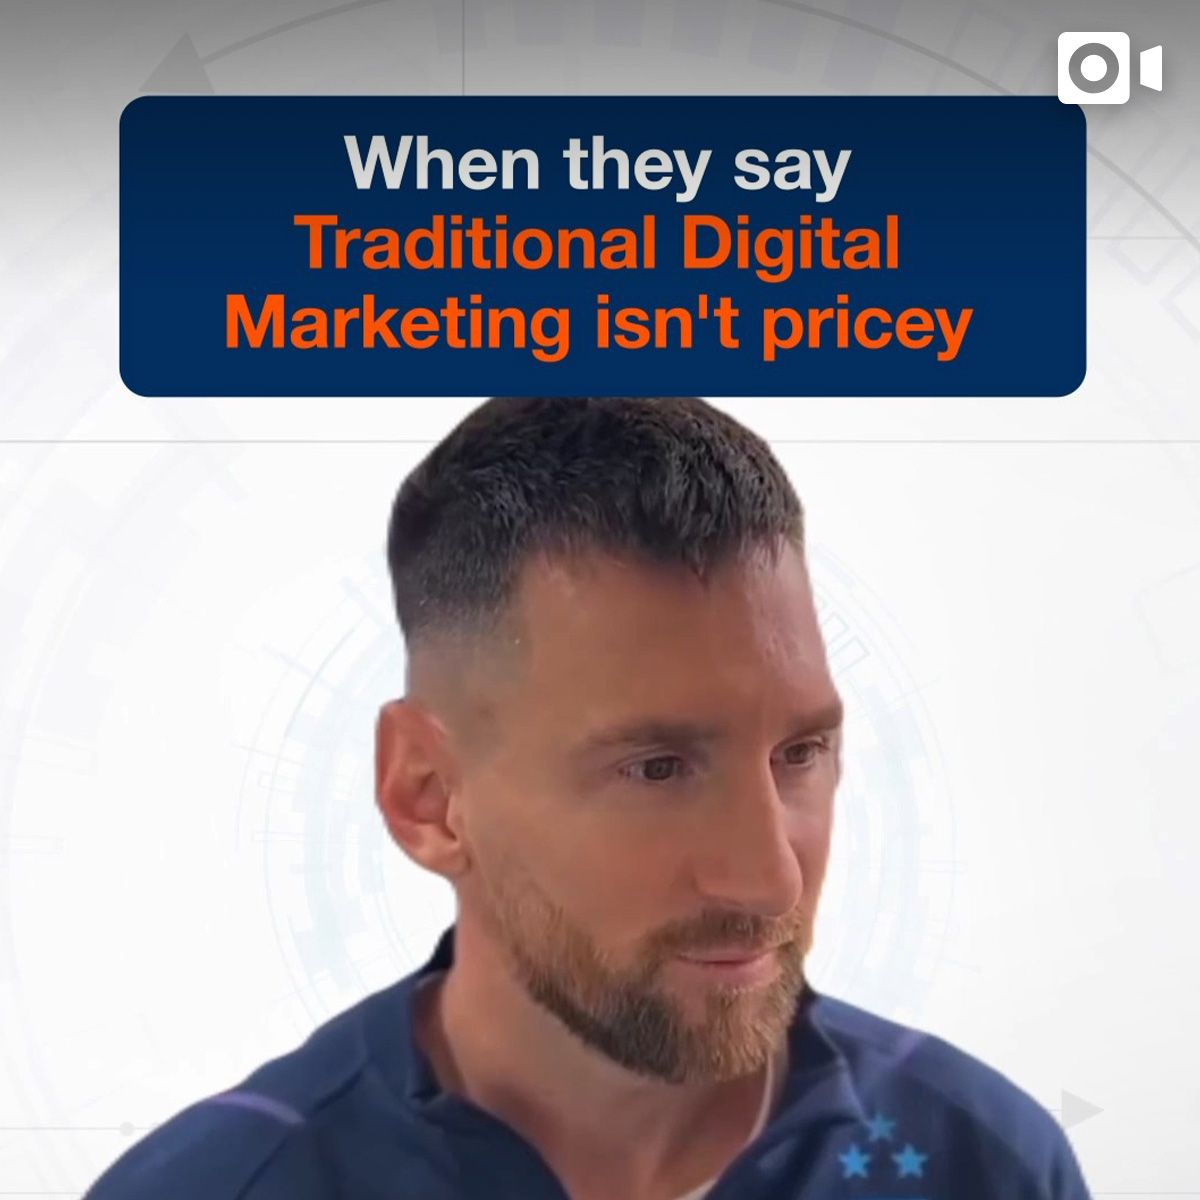 When they say Traditional Digital Marketing isn't pricey